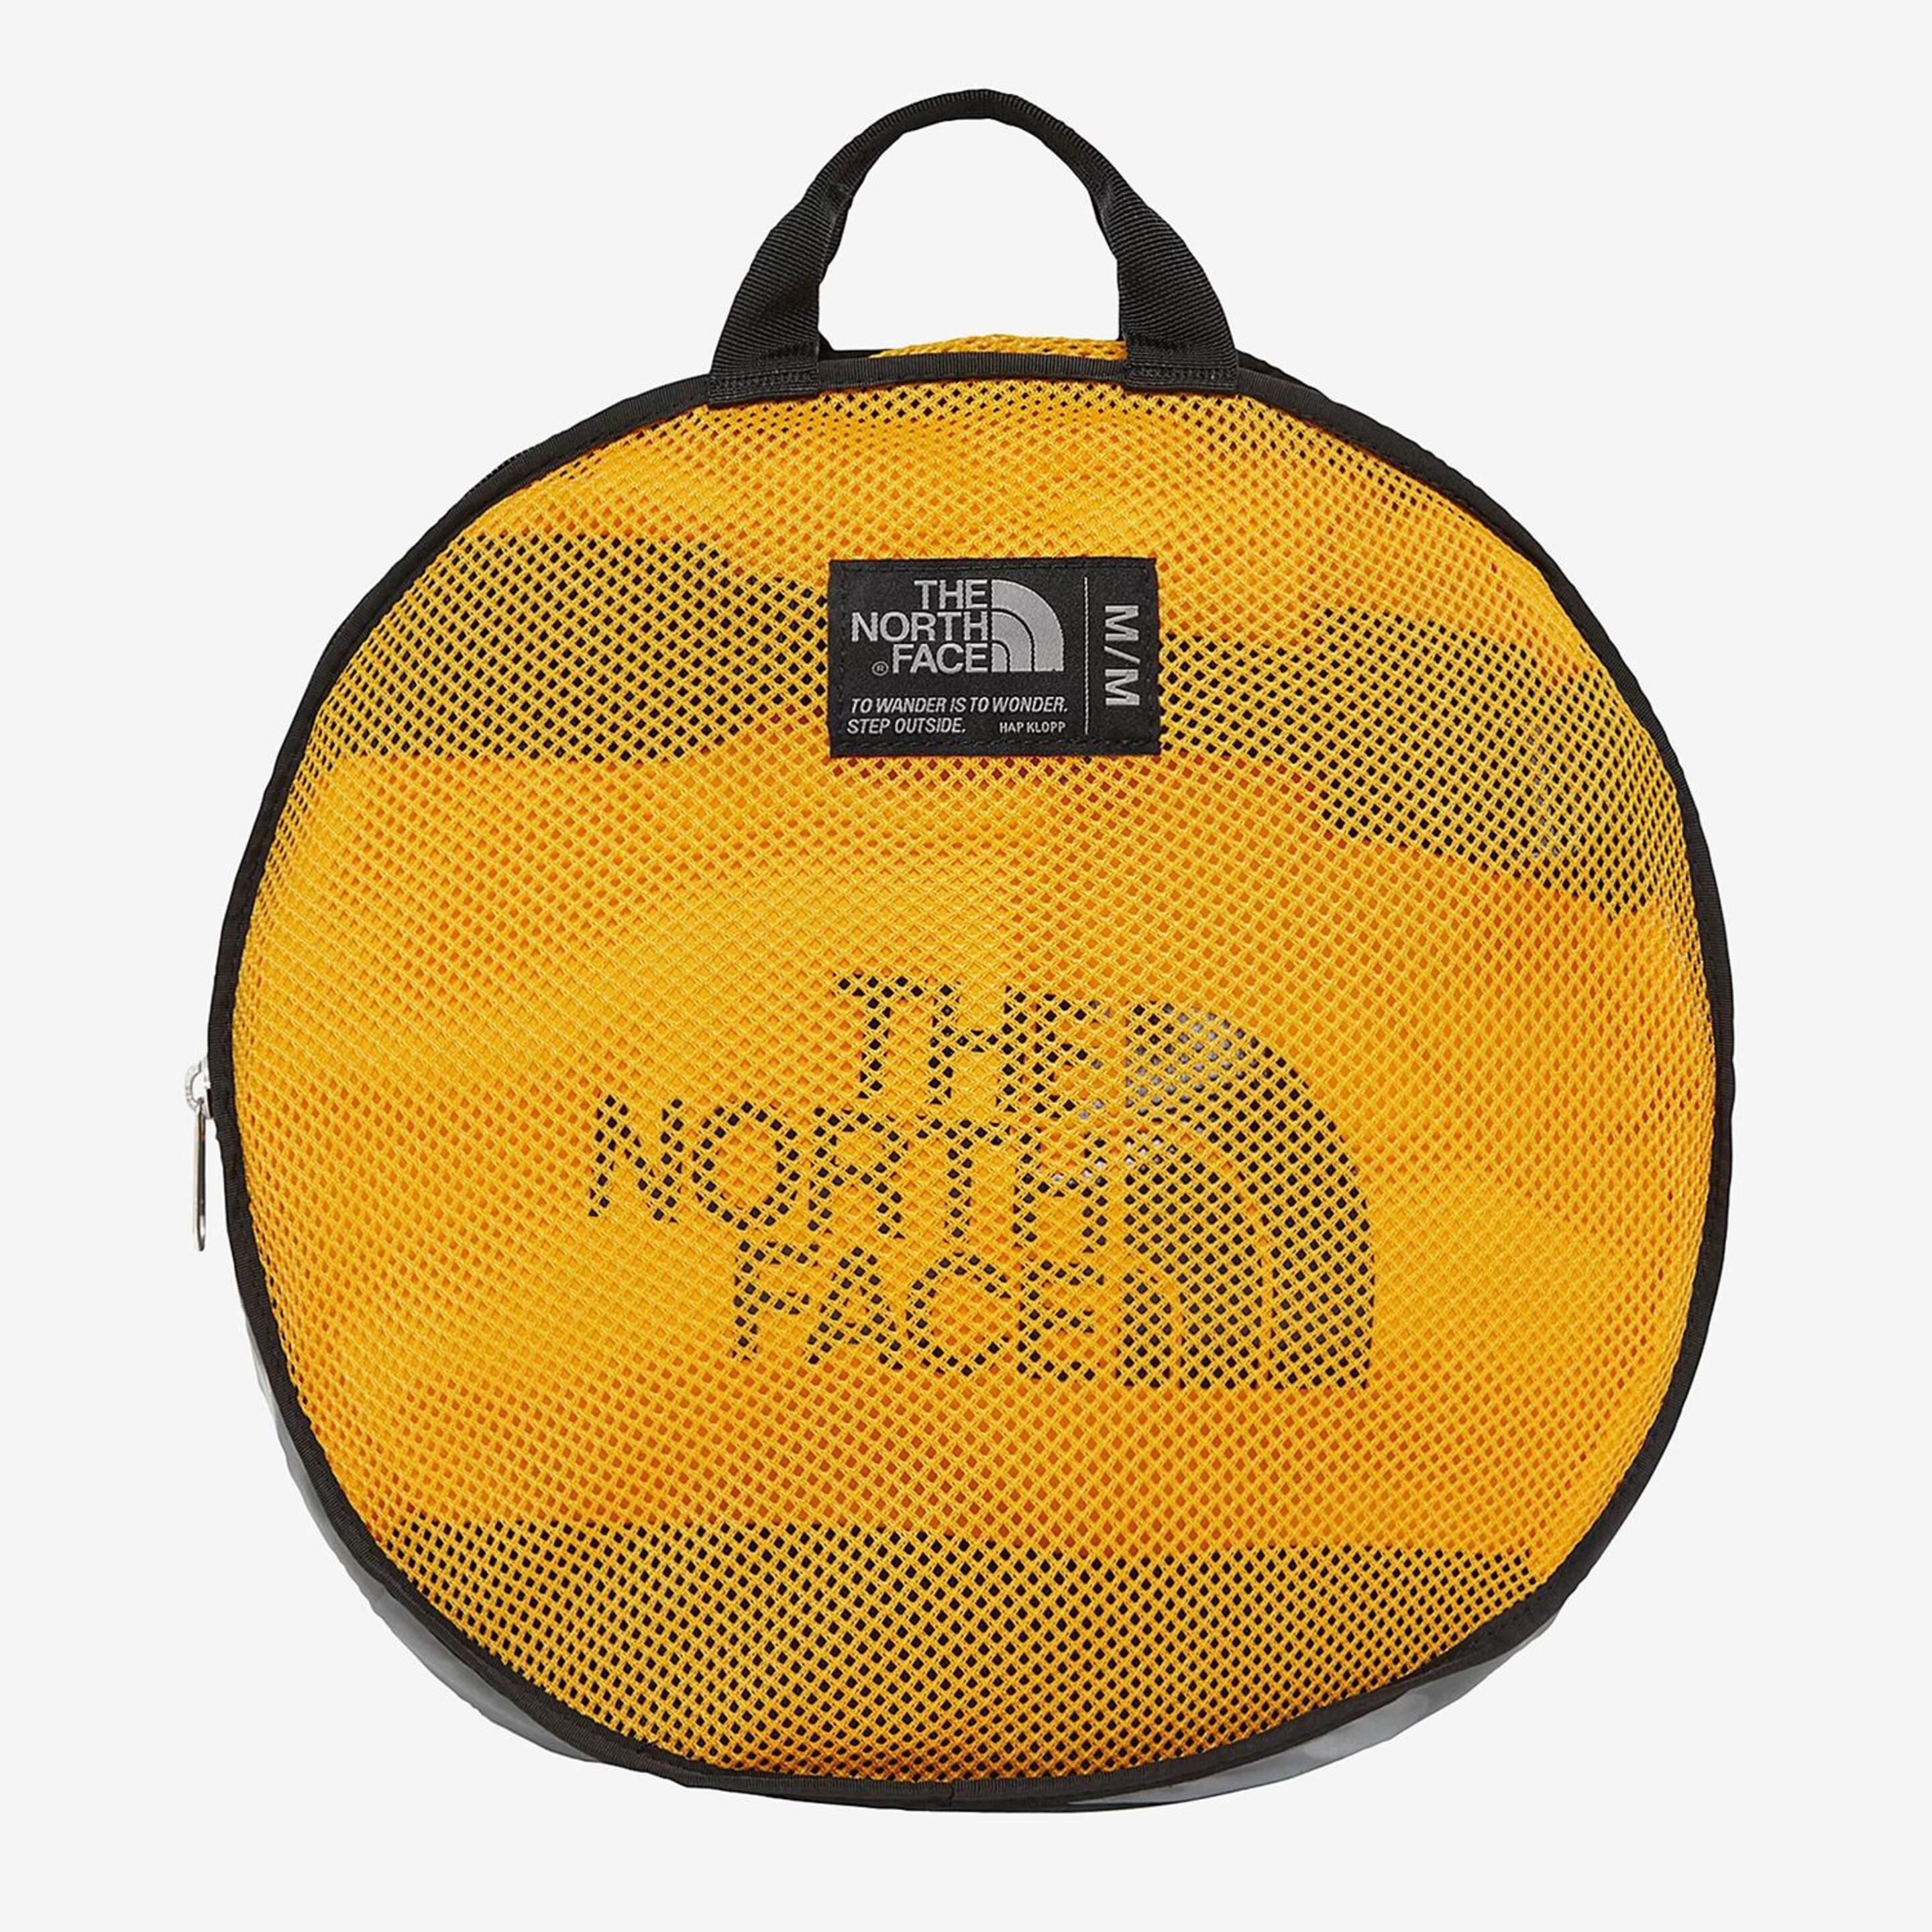 The North Face Travel Base